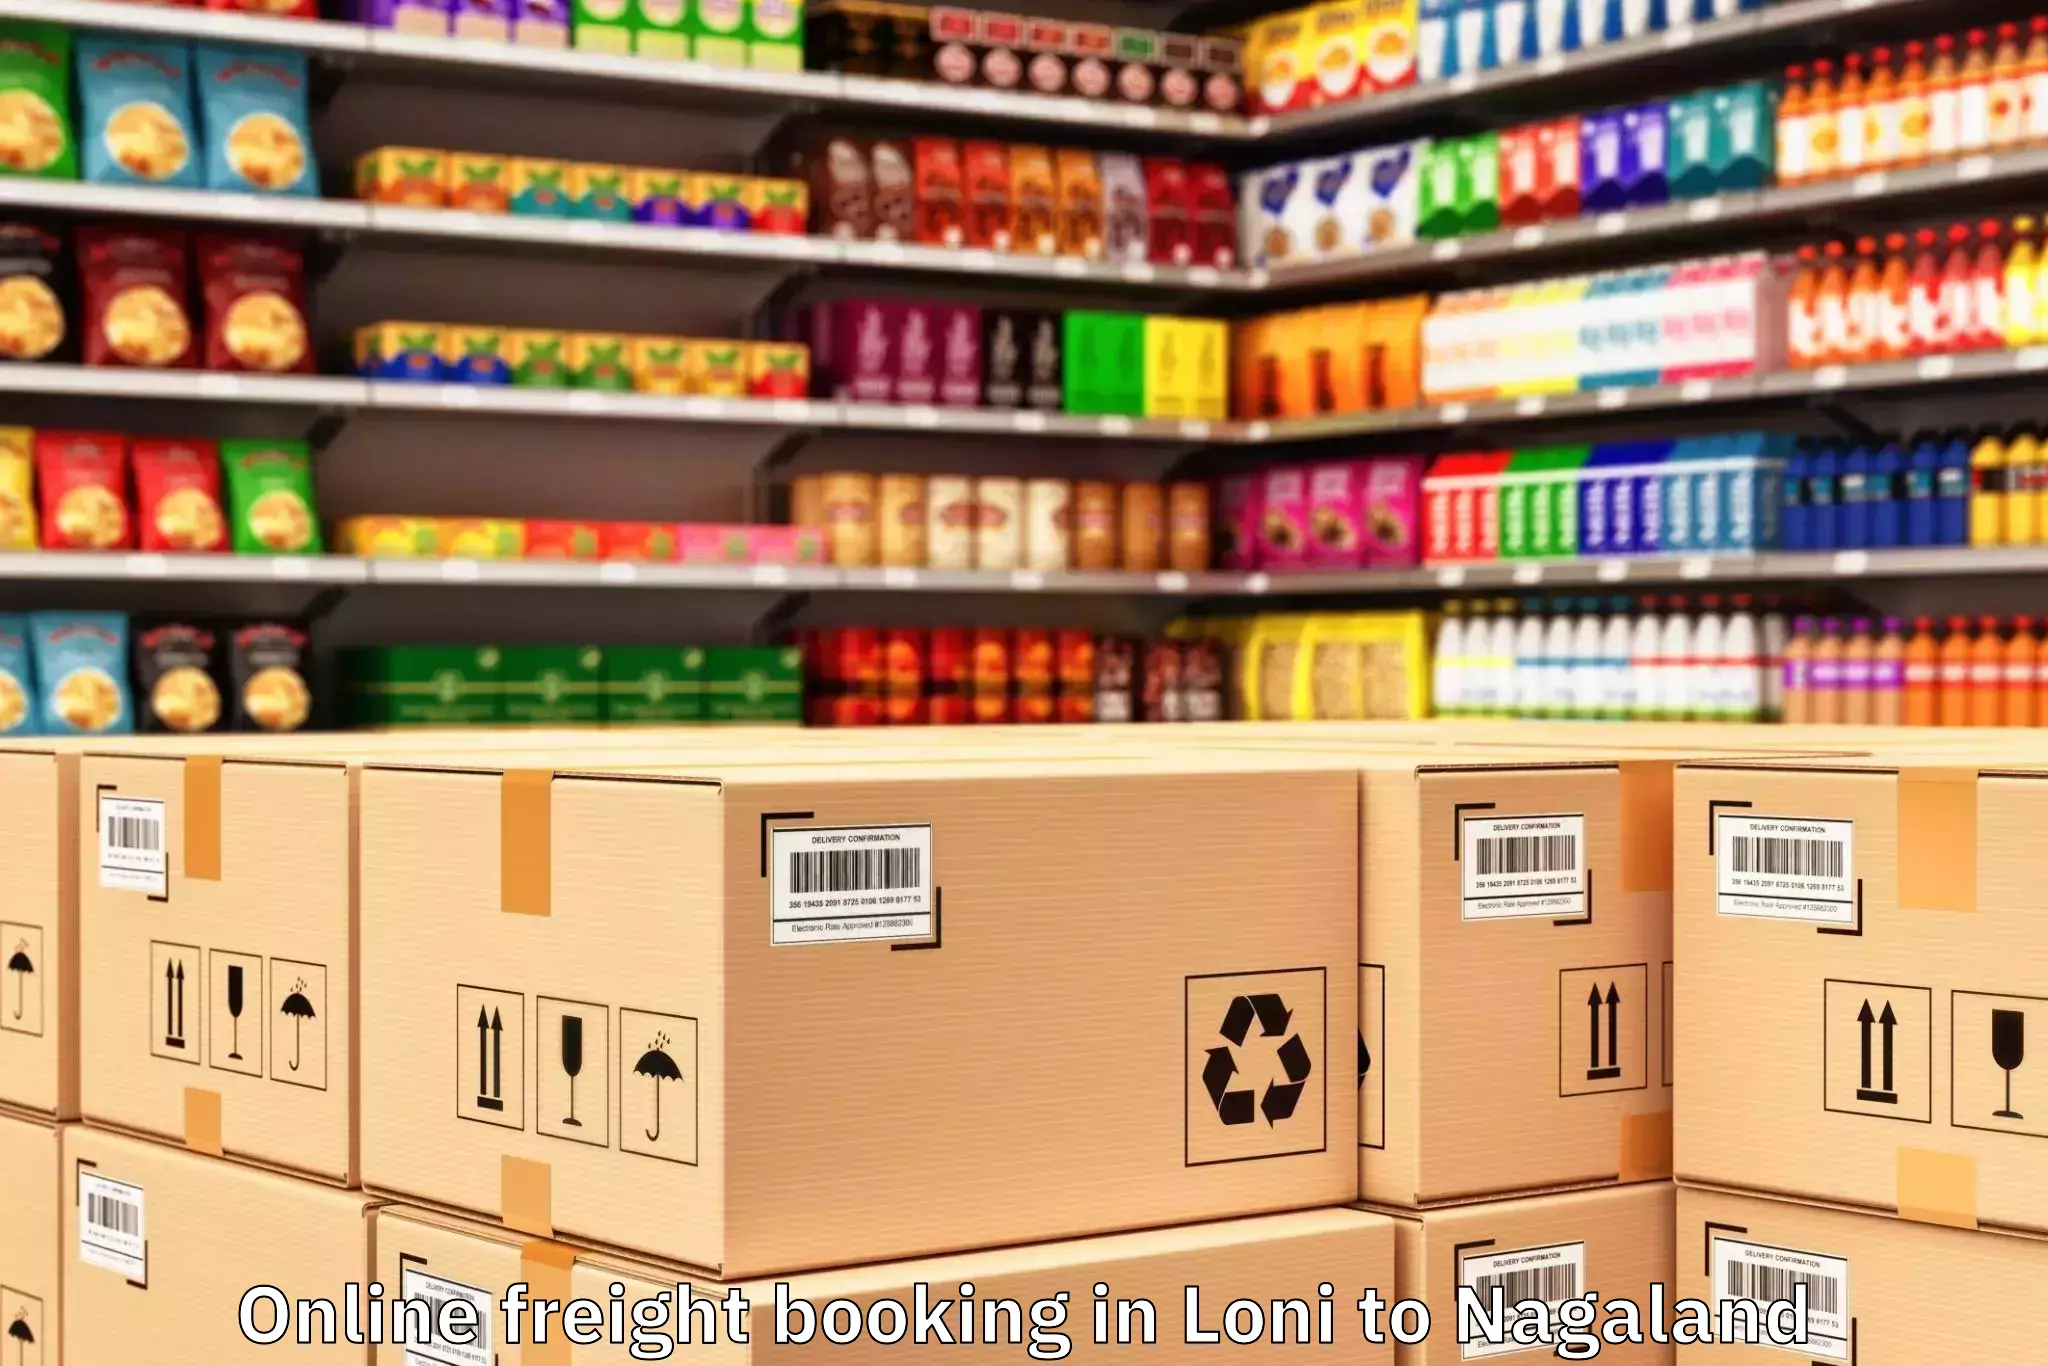 Book Loni to Chukitong Online Freight Booking Online